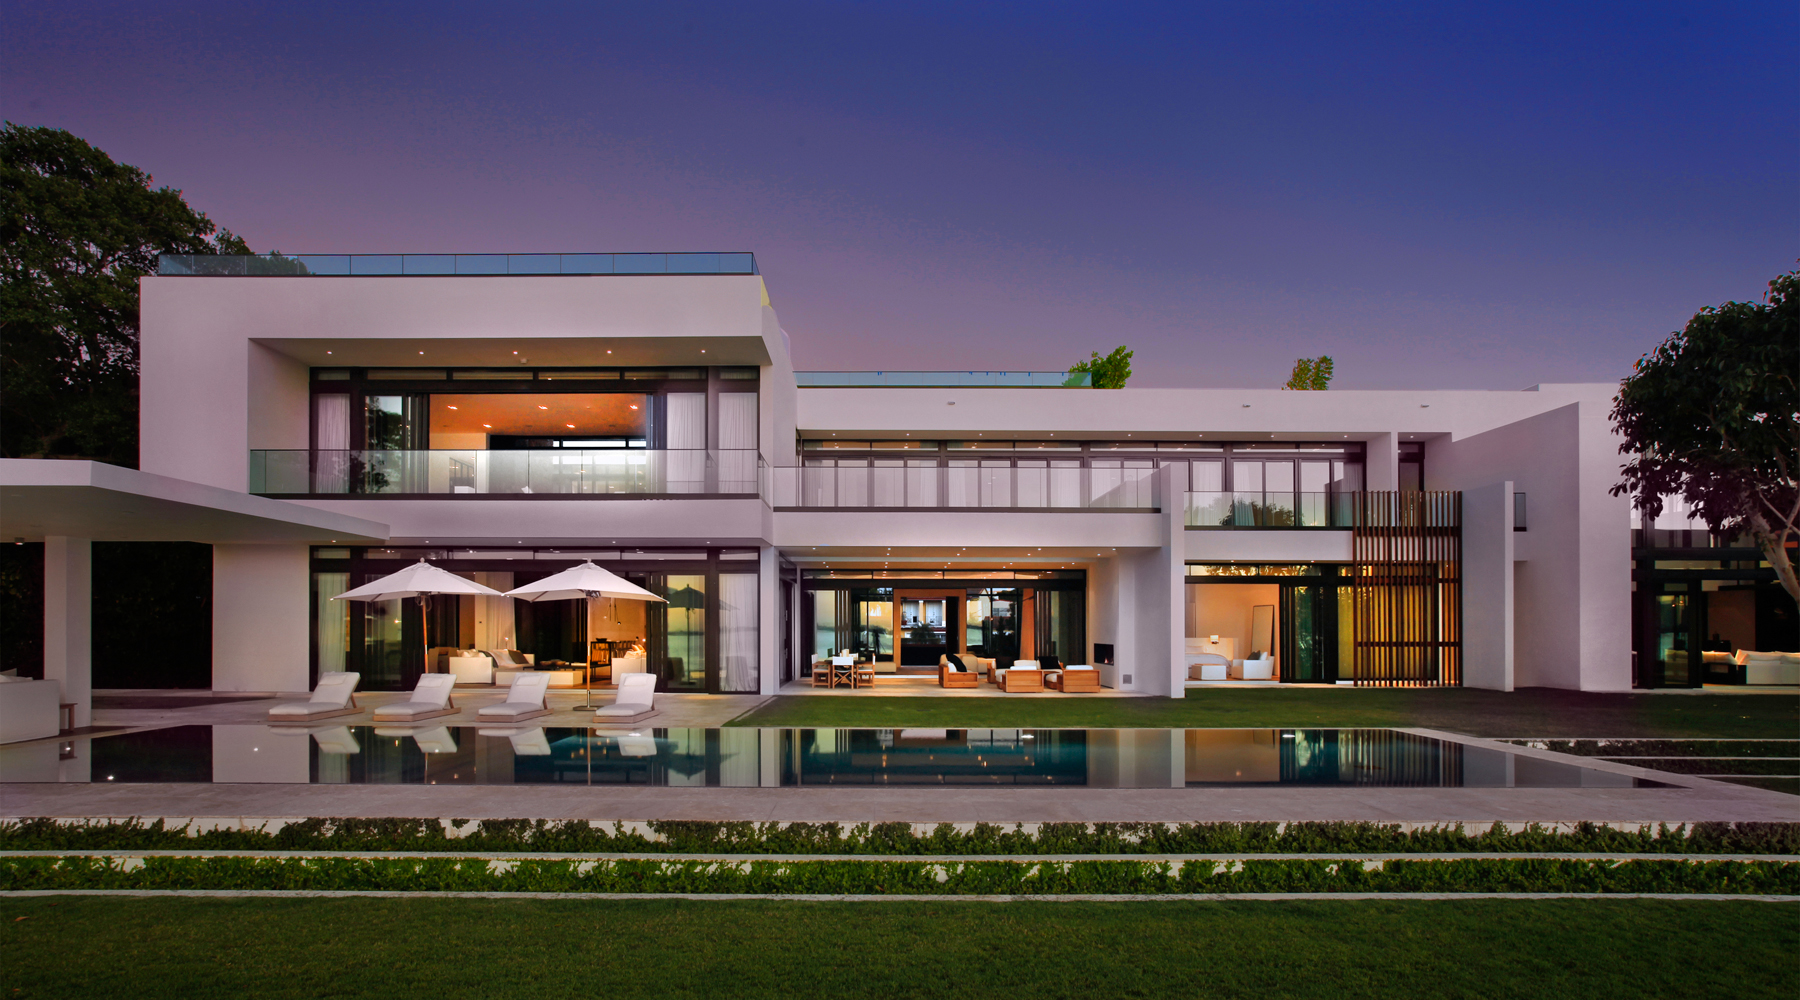 ONE Sotheby’s sold this nine bedroom, $30 million home in Miami Beach, previously owned by Alex Rodriguez. (Courtesy of ONE Sotheby's International Realty)